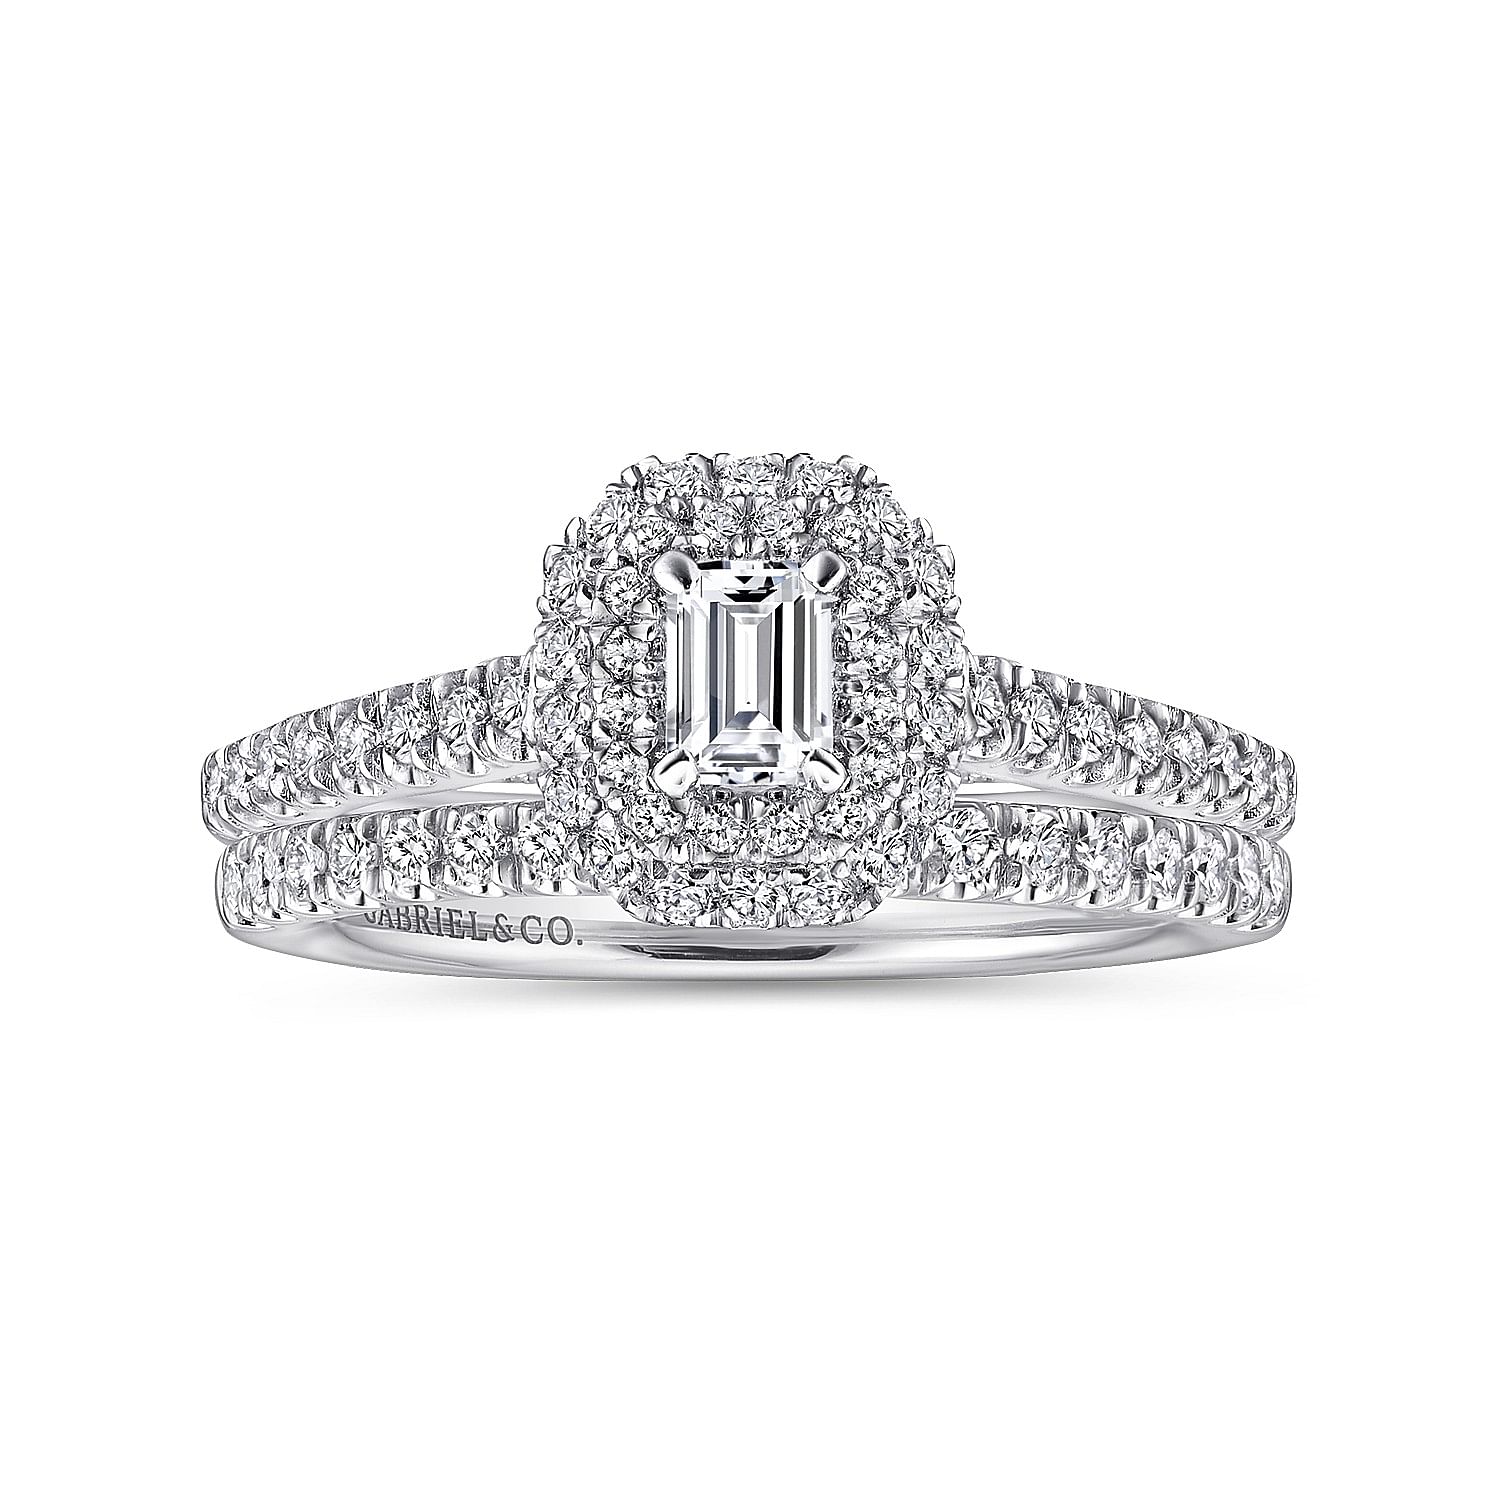 14K White Gold Emerald Cut Complete Diamond Engagement Ring